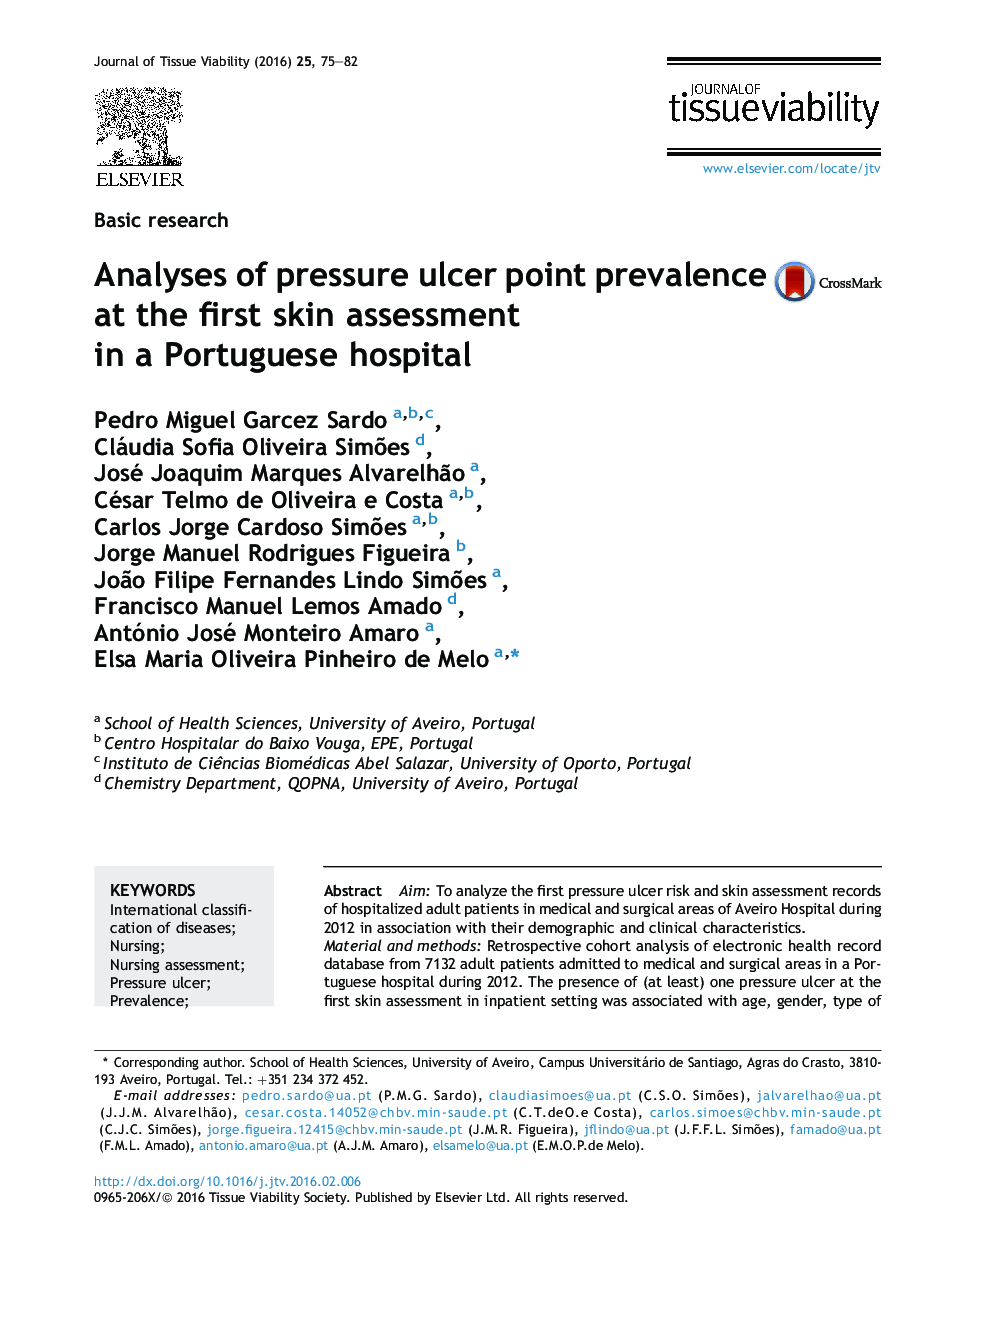 Basic researchAnalyses of pressure ulcer point prevalence at the first skin assessment in a Portuguese hospital